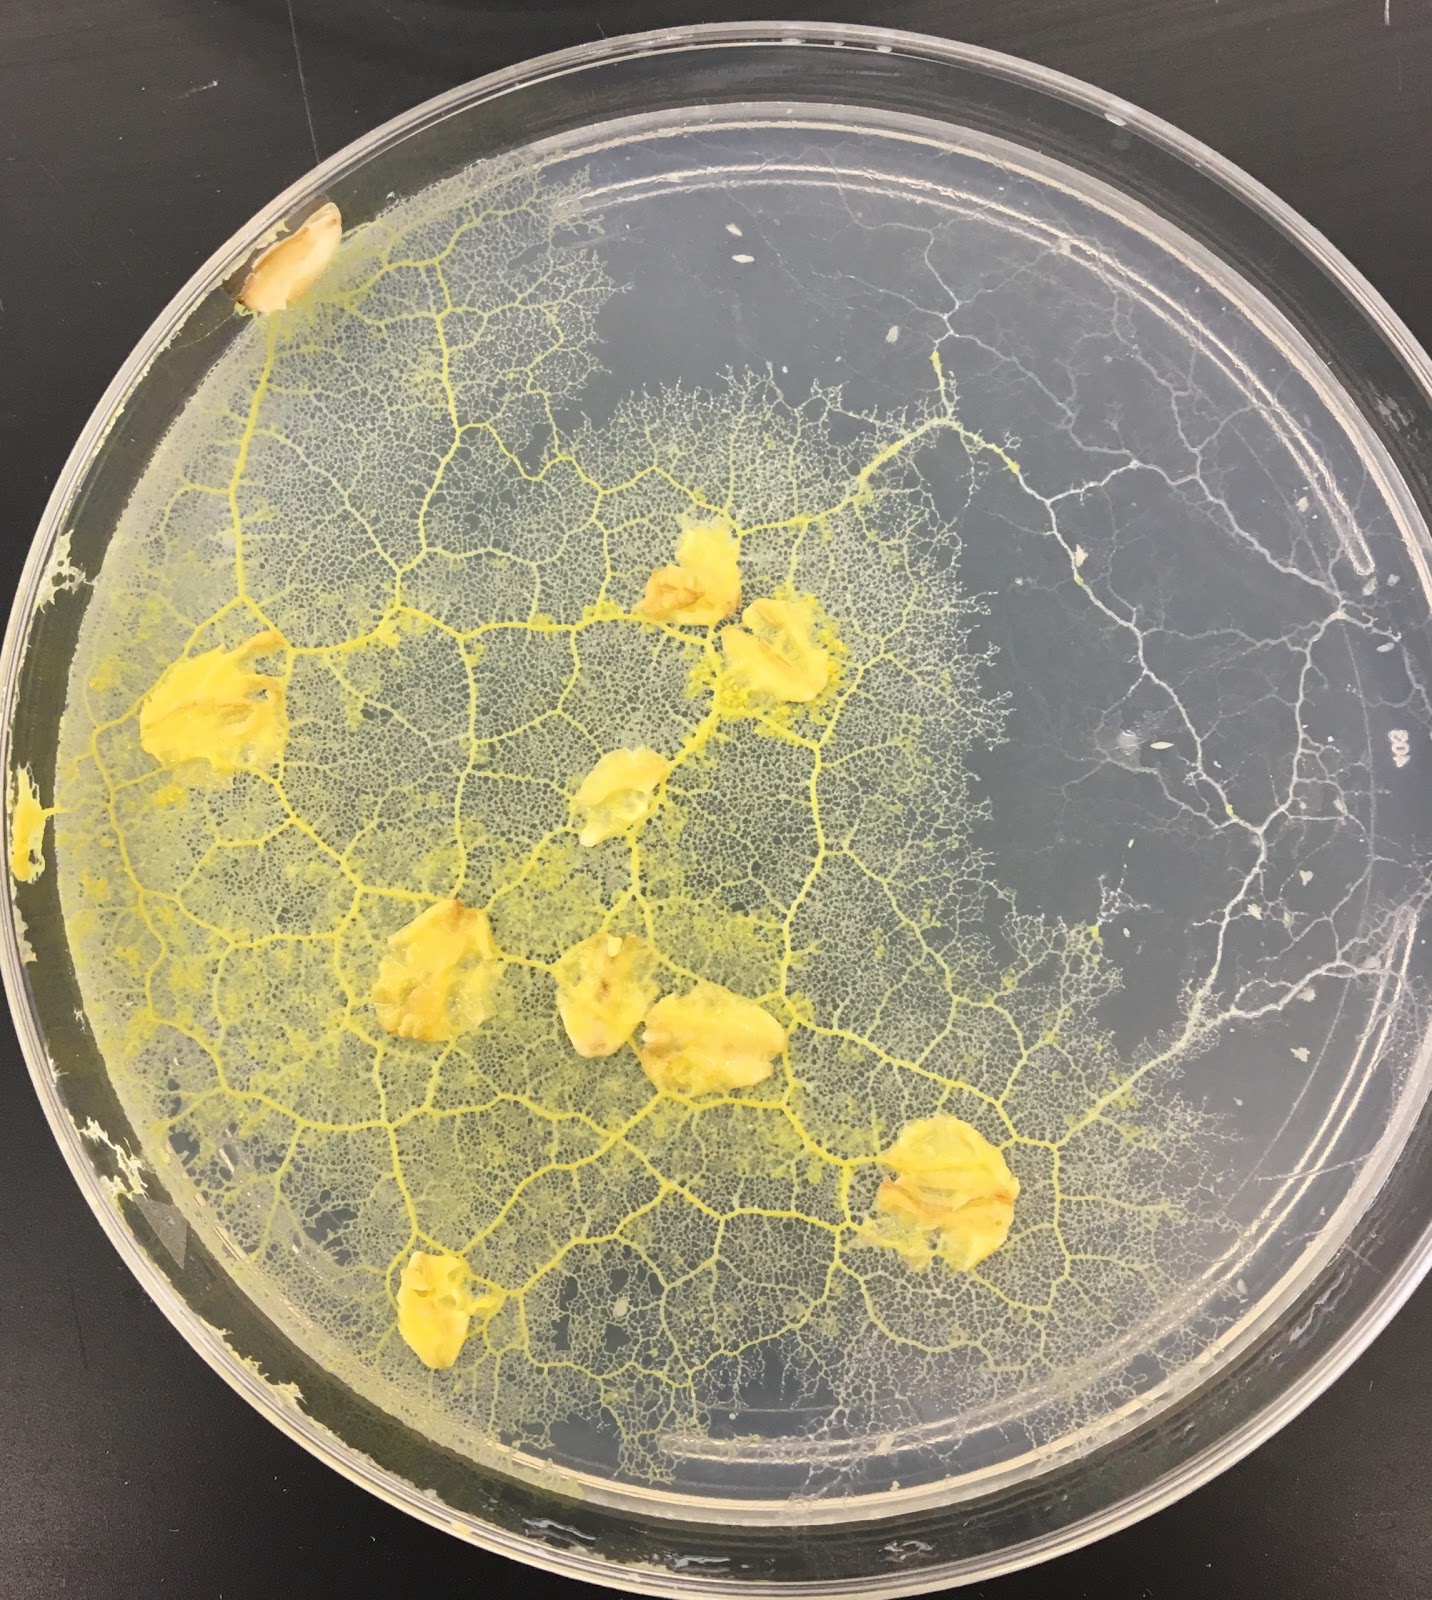 Physarum: a plasmodial slime mold – Inanimate Life